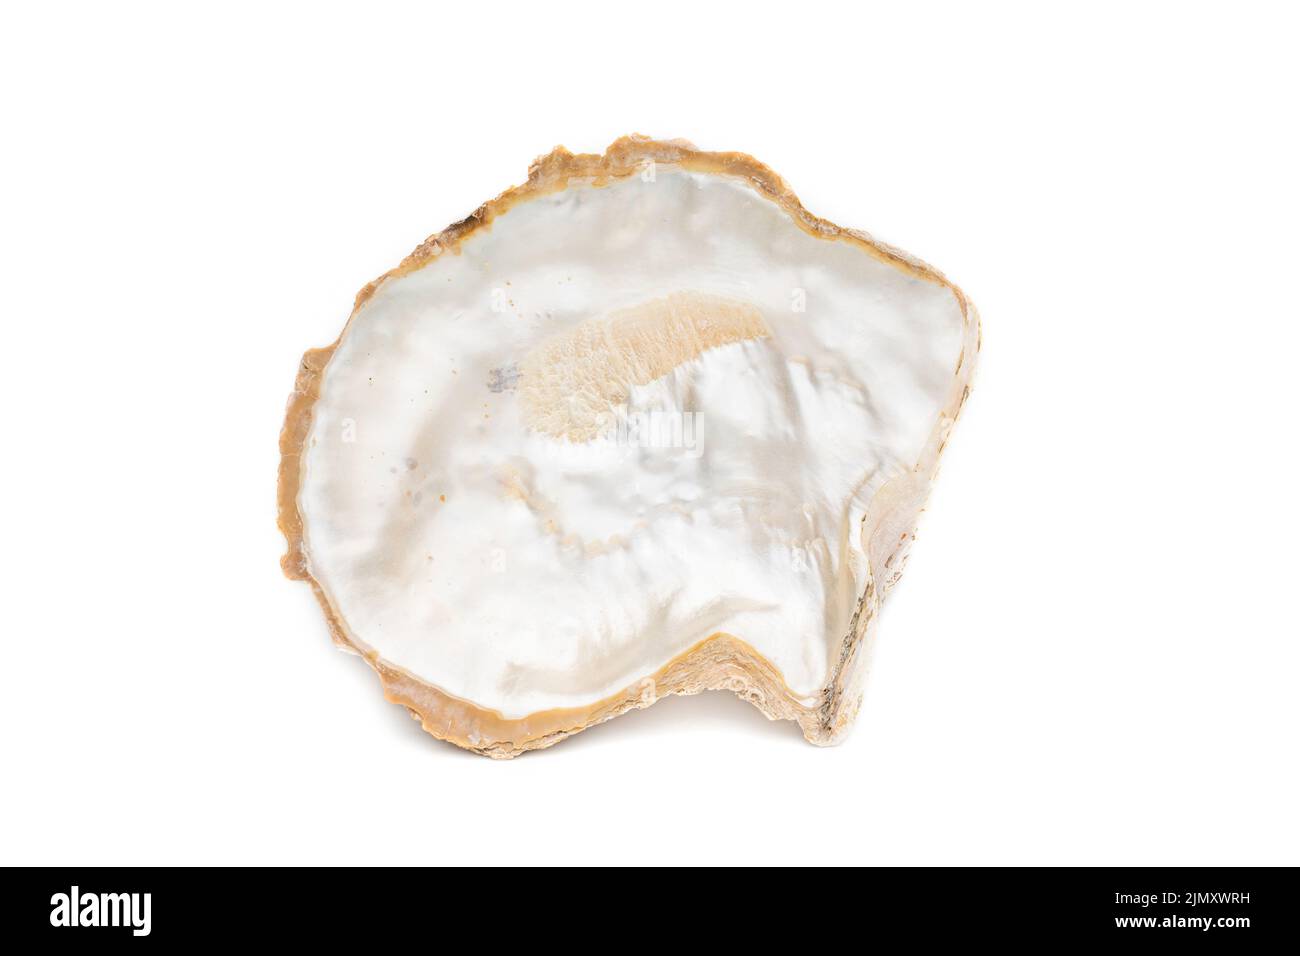 Image of seashells clam pearled on a white background. Undersea Animals. Sea Shells. Stock Photo